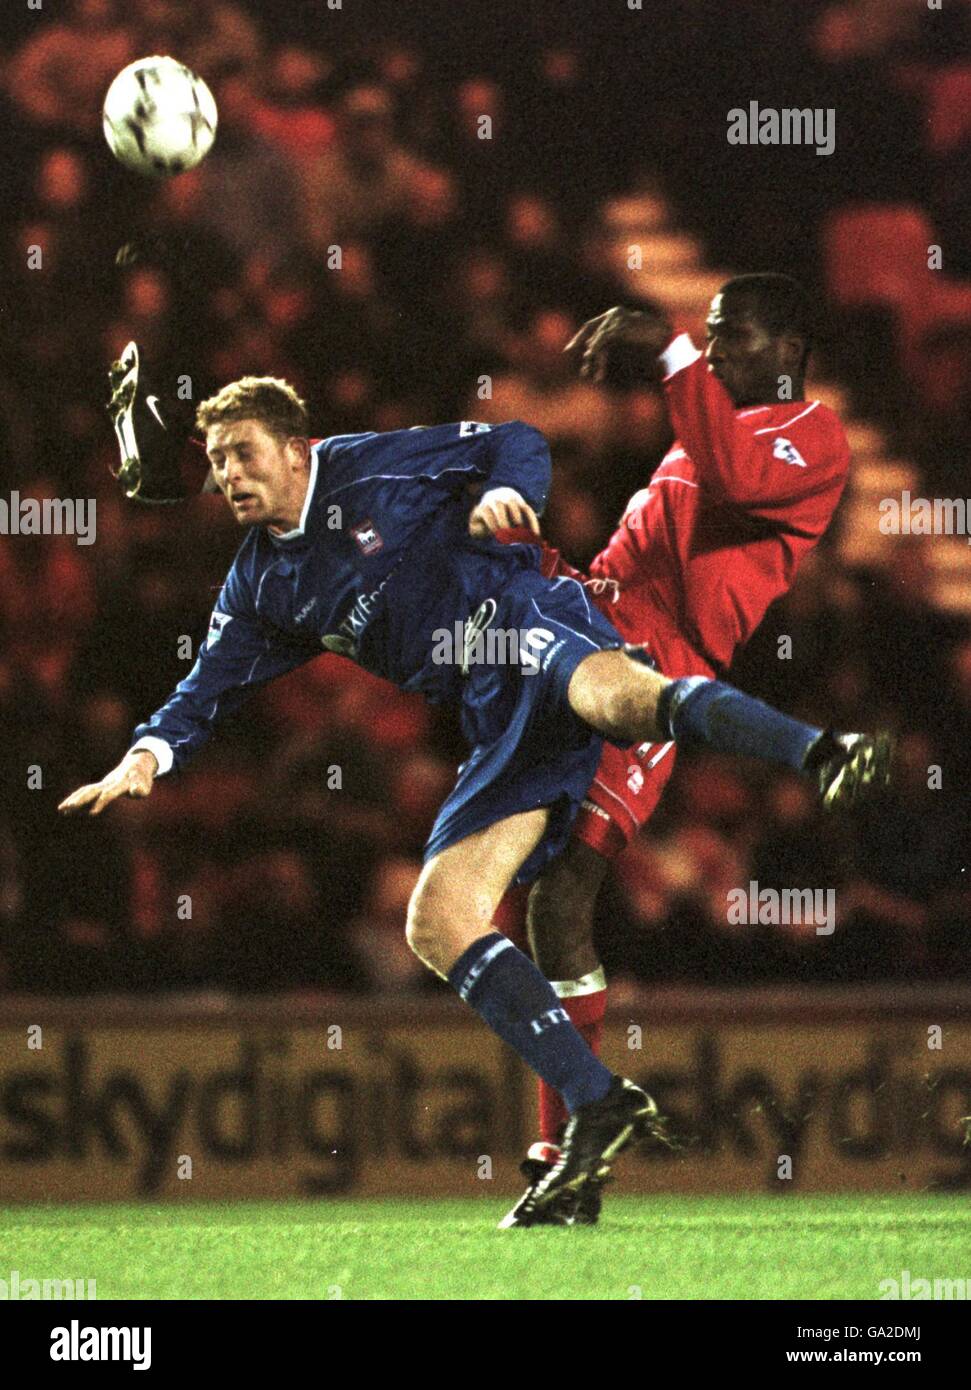 Soccer - FA Barclaycard Premiership - Middlesbrough v Ipswich Town. Ipswich Town's Alun Armstrong battles with Ugo Ehiogu of Middlesbrough Stock Photo